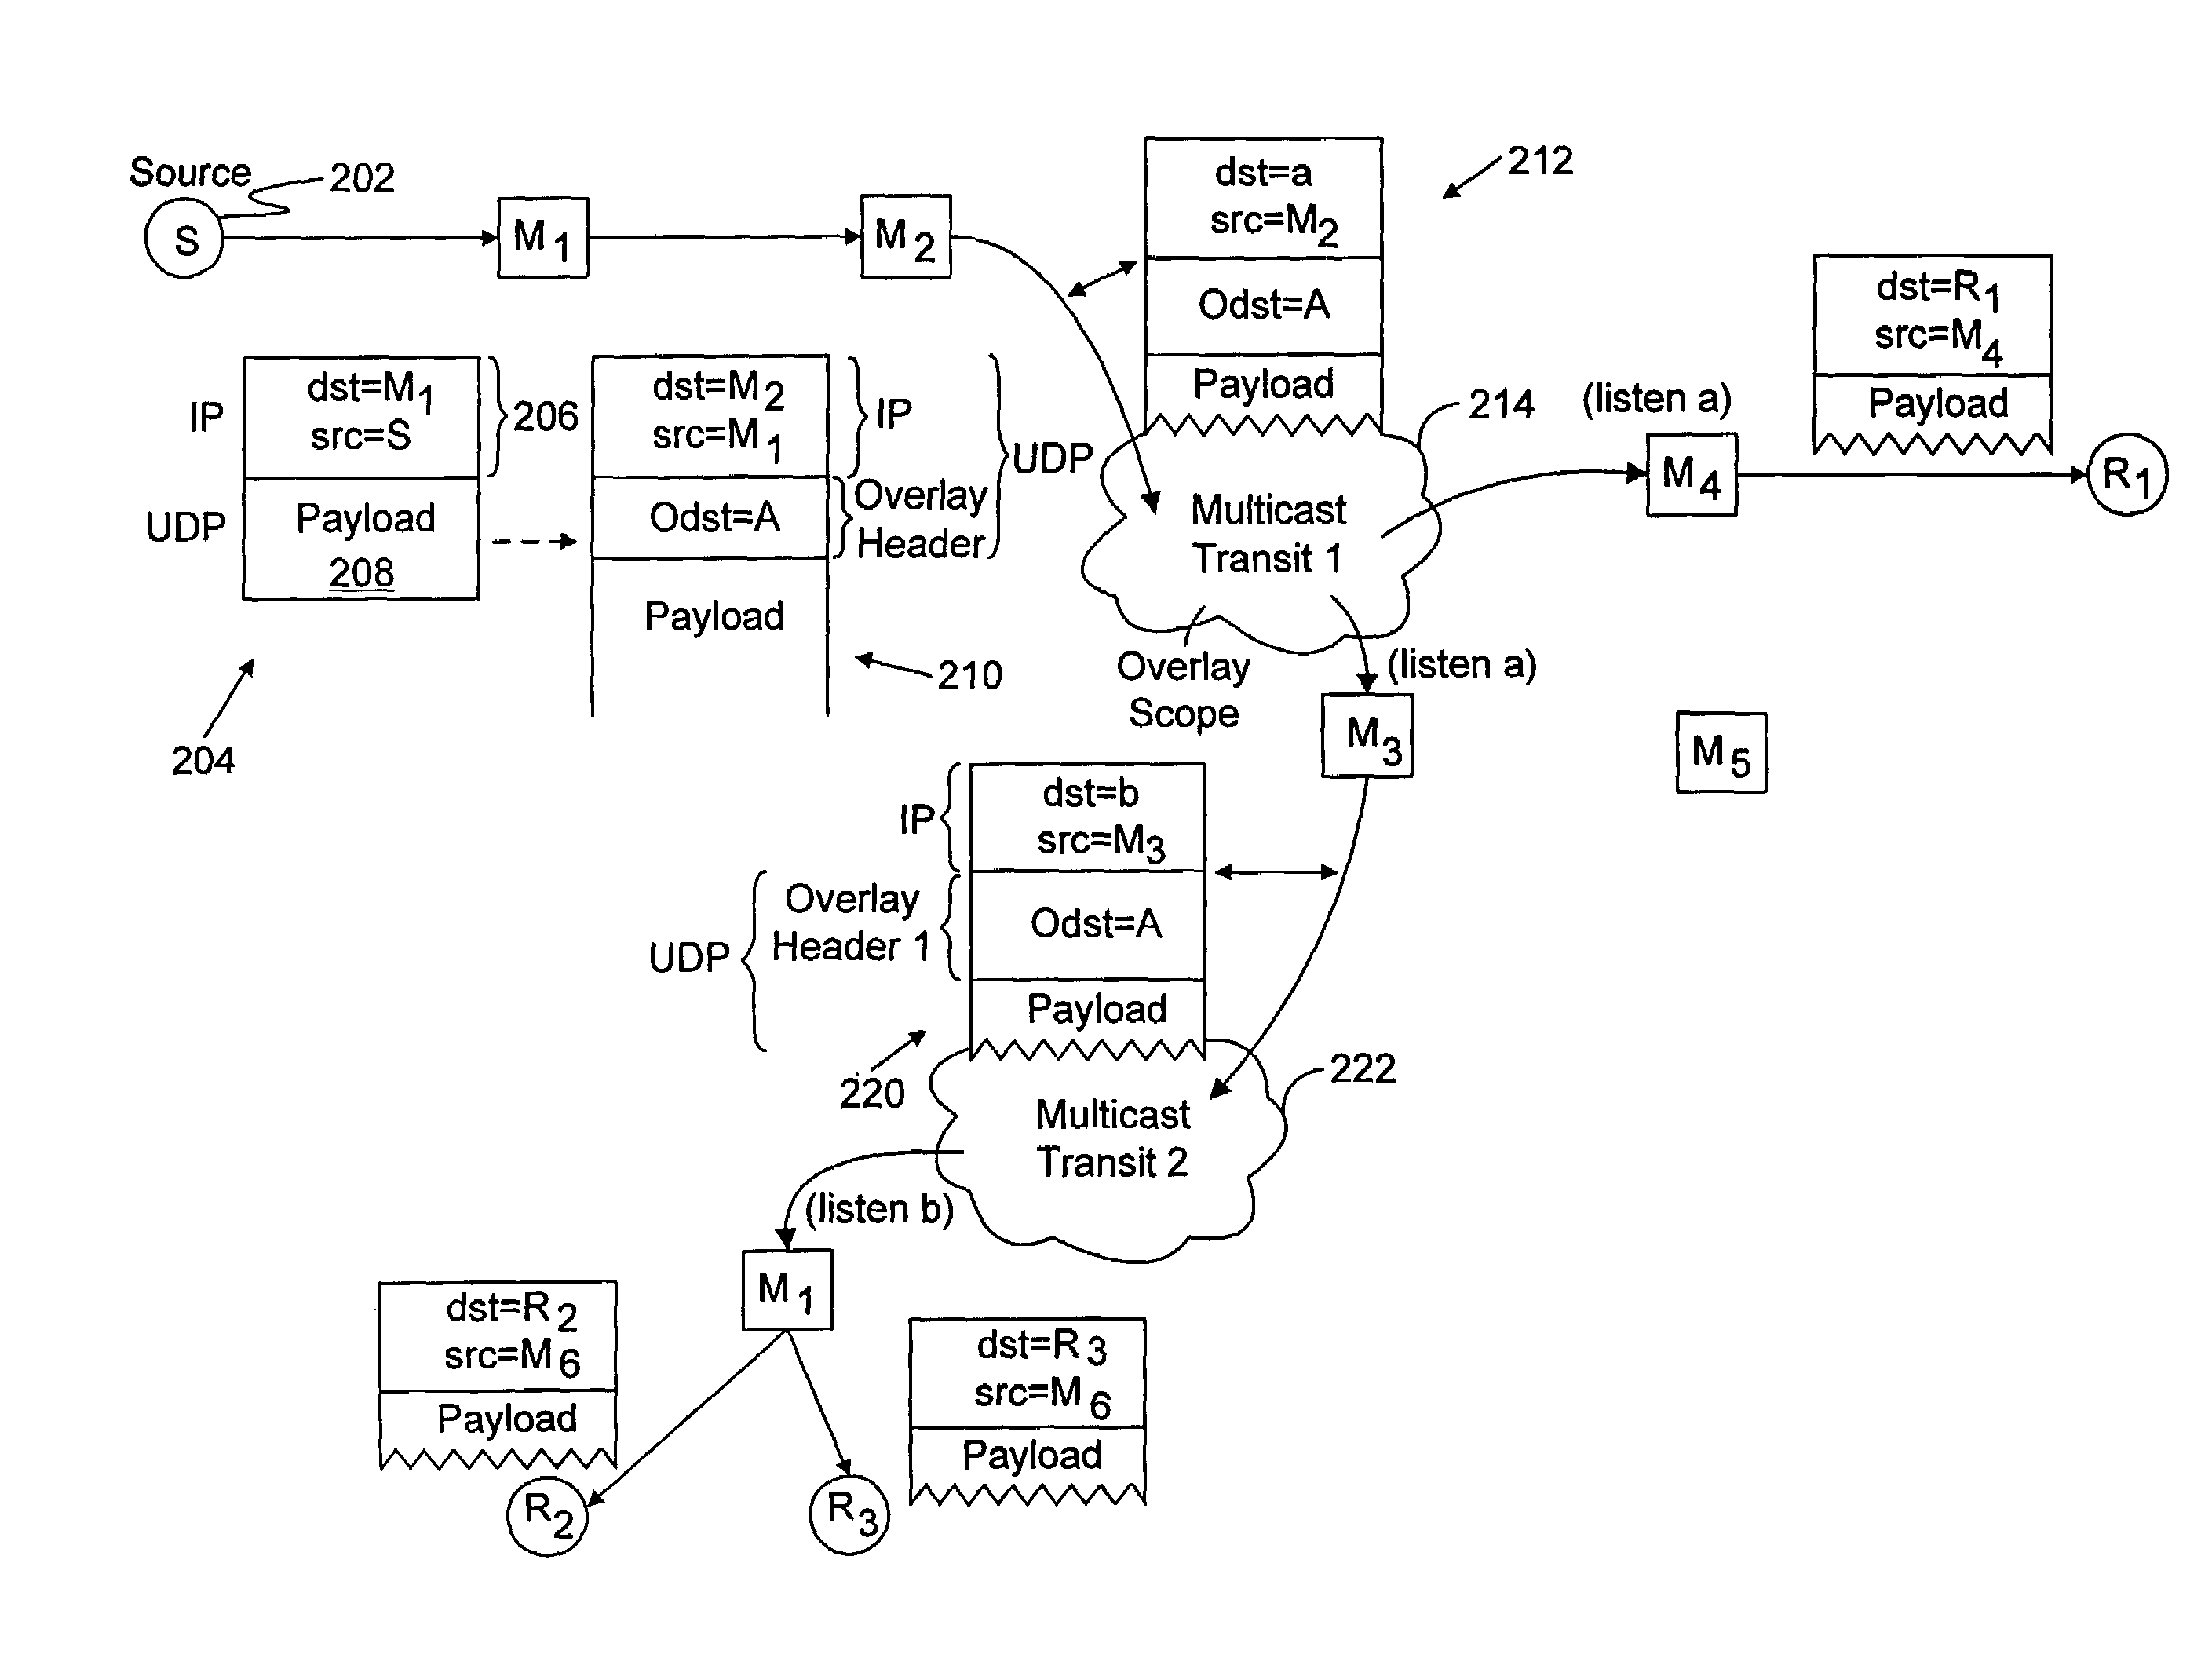 Performing multicast communication in computer networks by using overlay routing